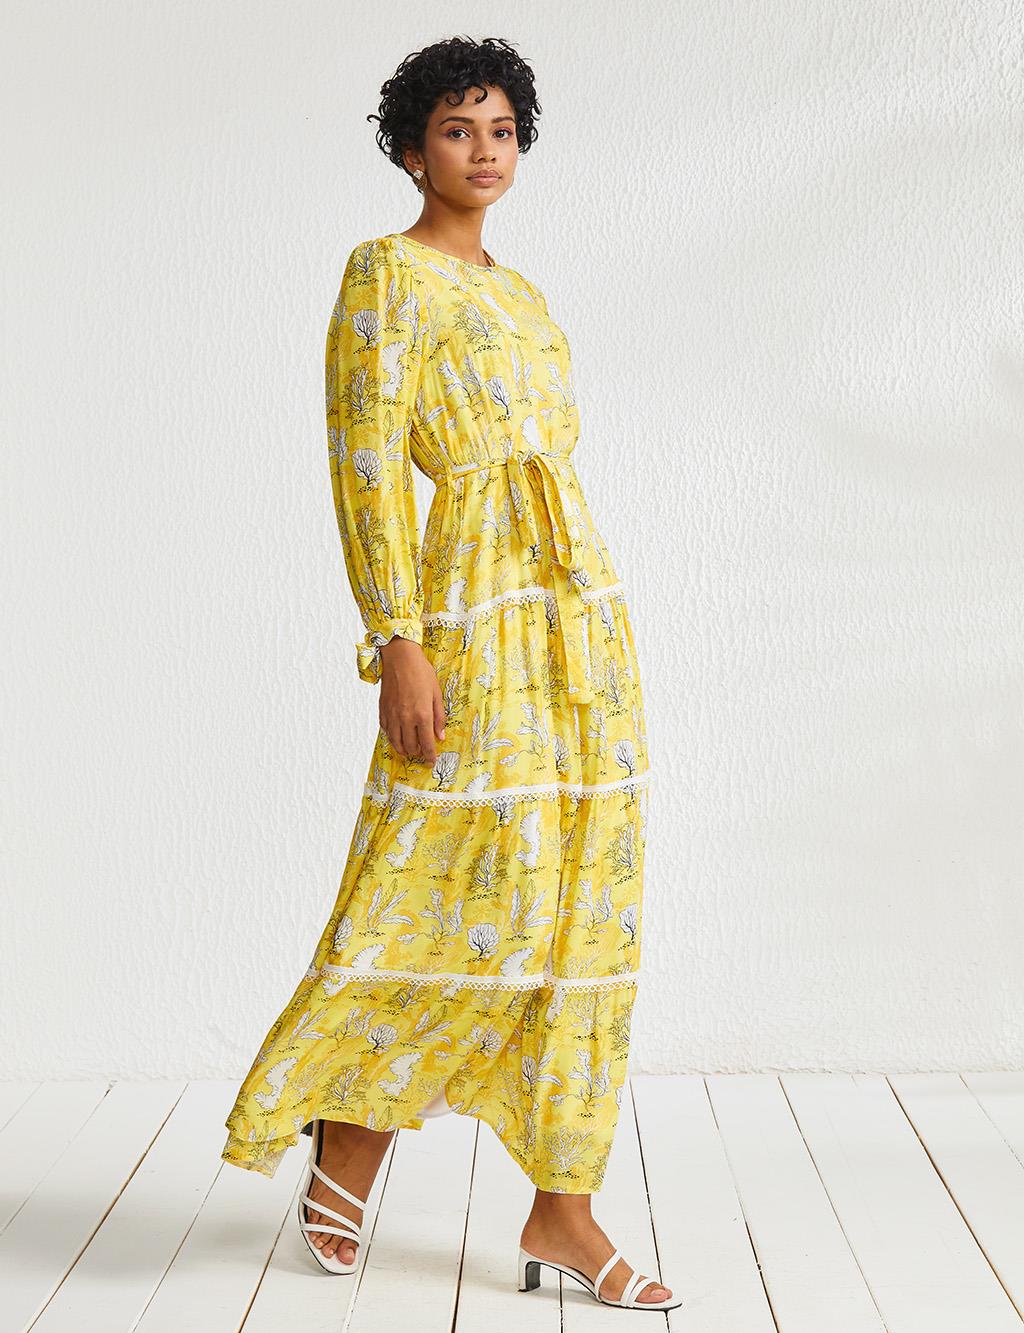 Floral Patterned Crew Neck Dress Yellow-White